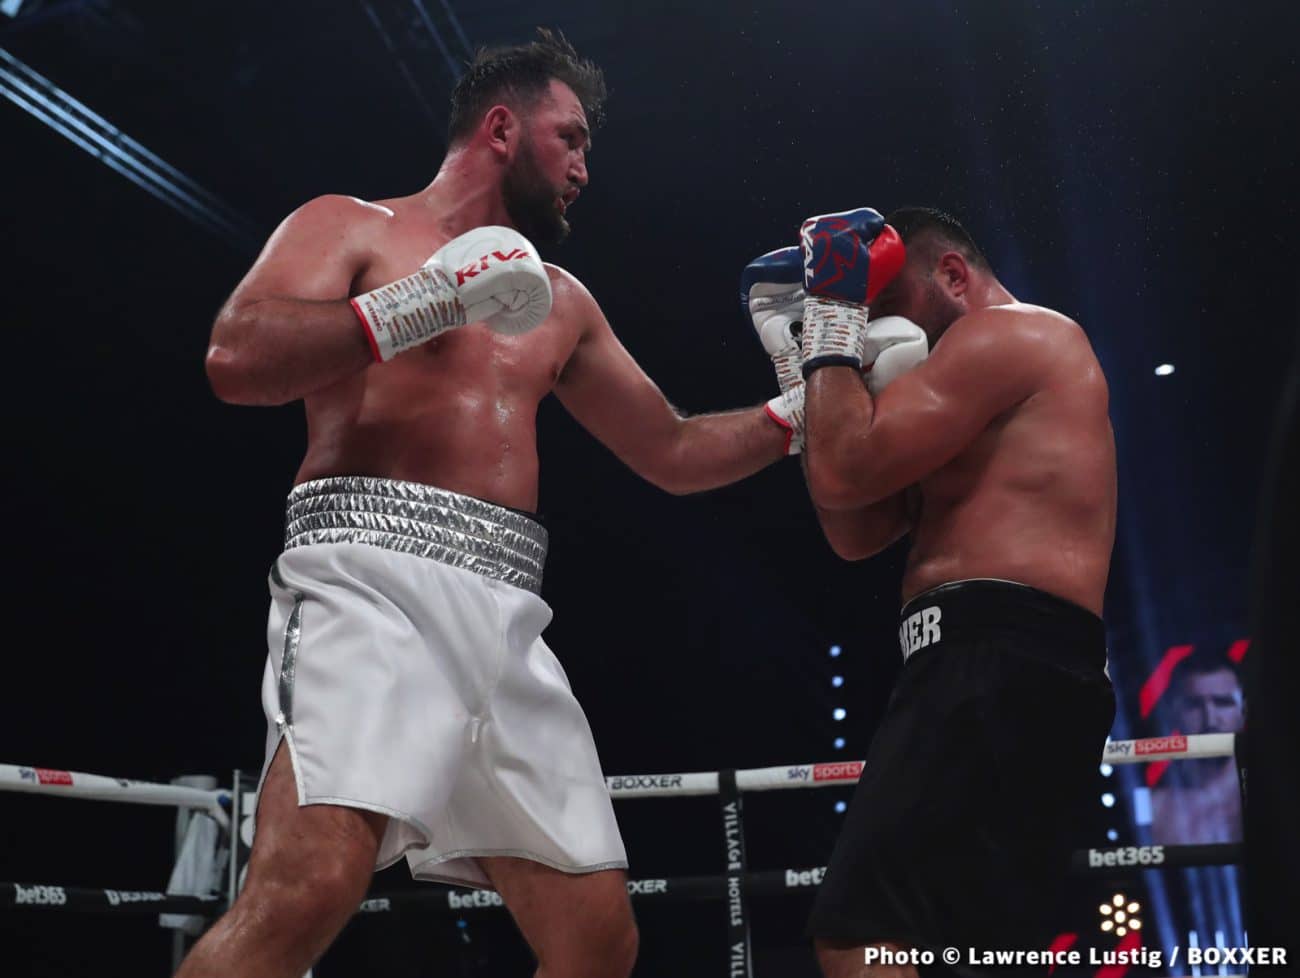 Image: The return of Hughie Fury: Hughie needs 3 fights in 2022 to win an alphabet title